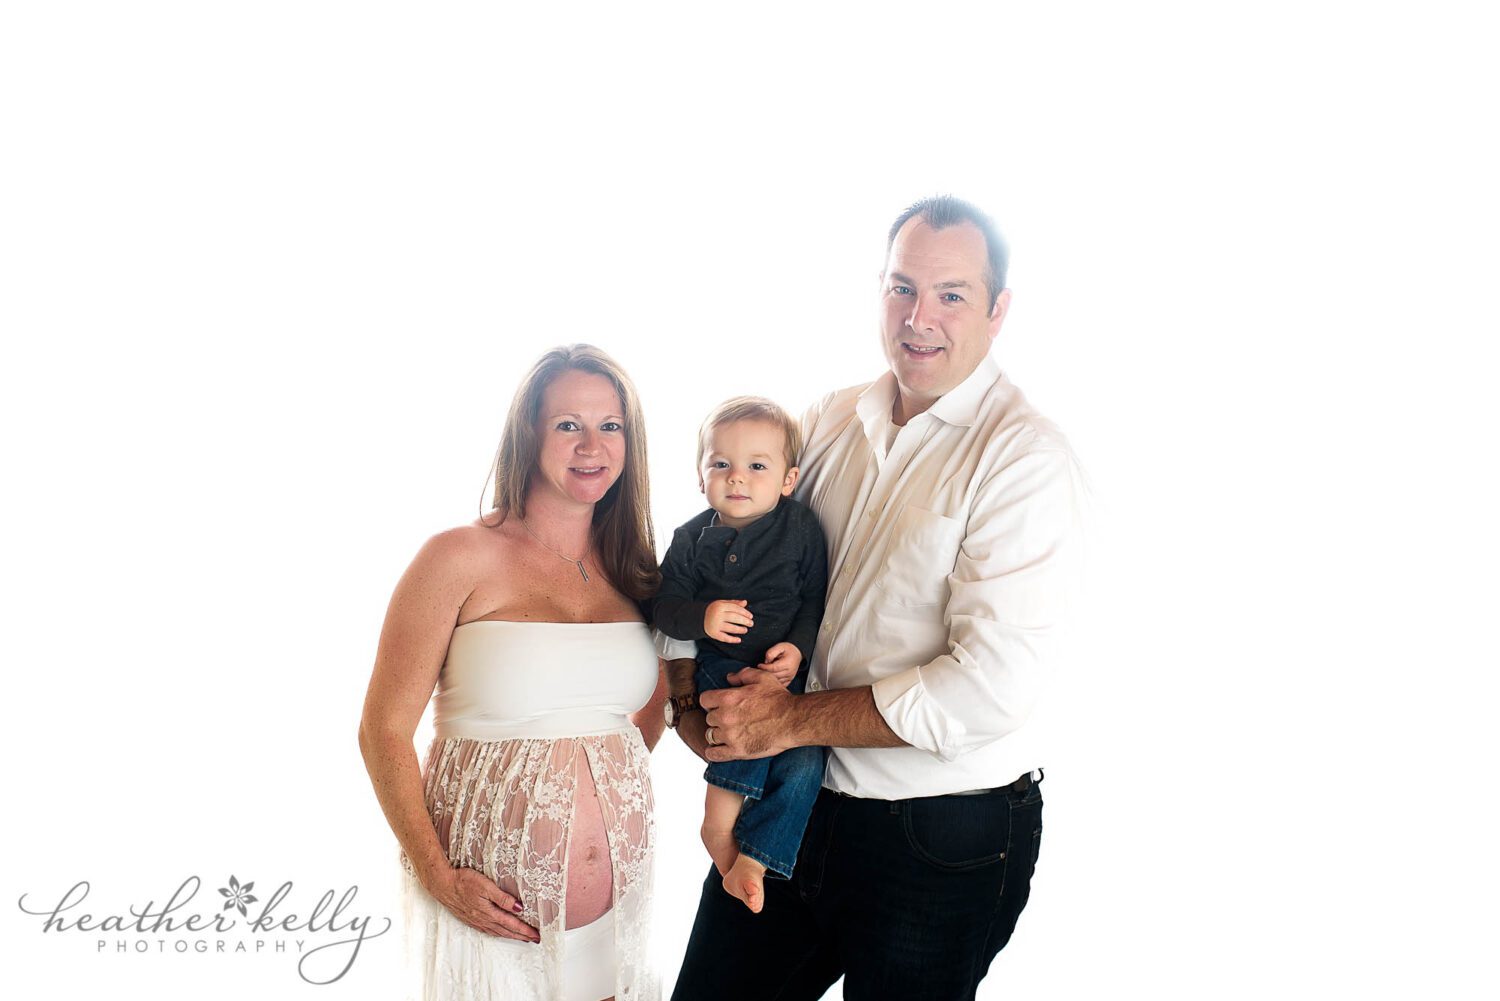 sandy hook maternity photography

high key maternity photo of pregnant mom with dad and their 20 month old son. All looking and smiling at the camera. 